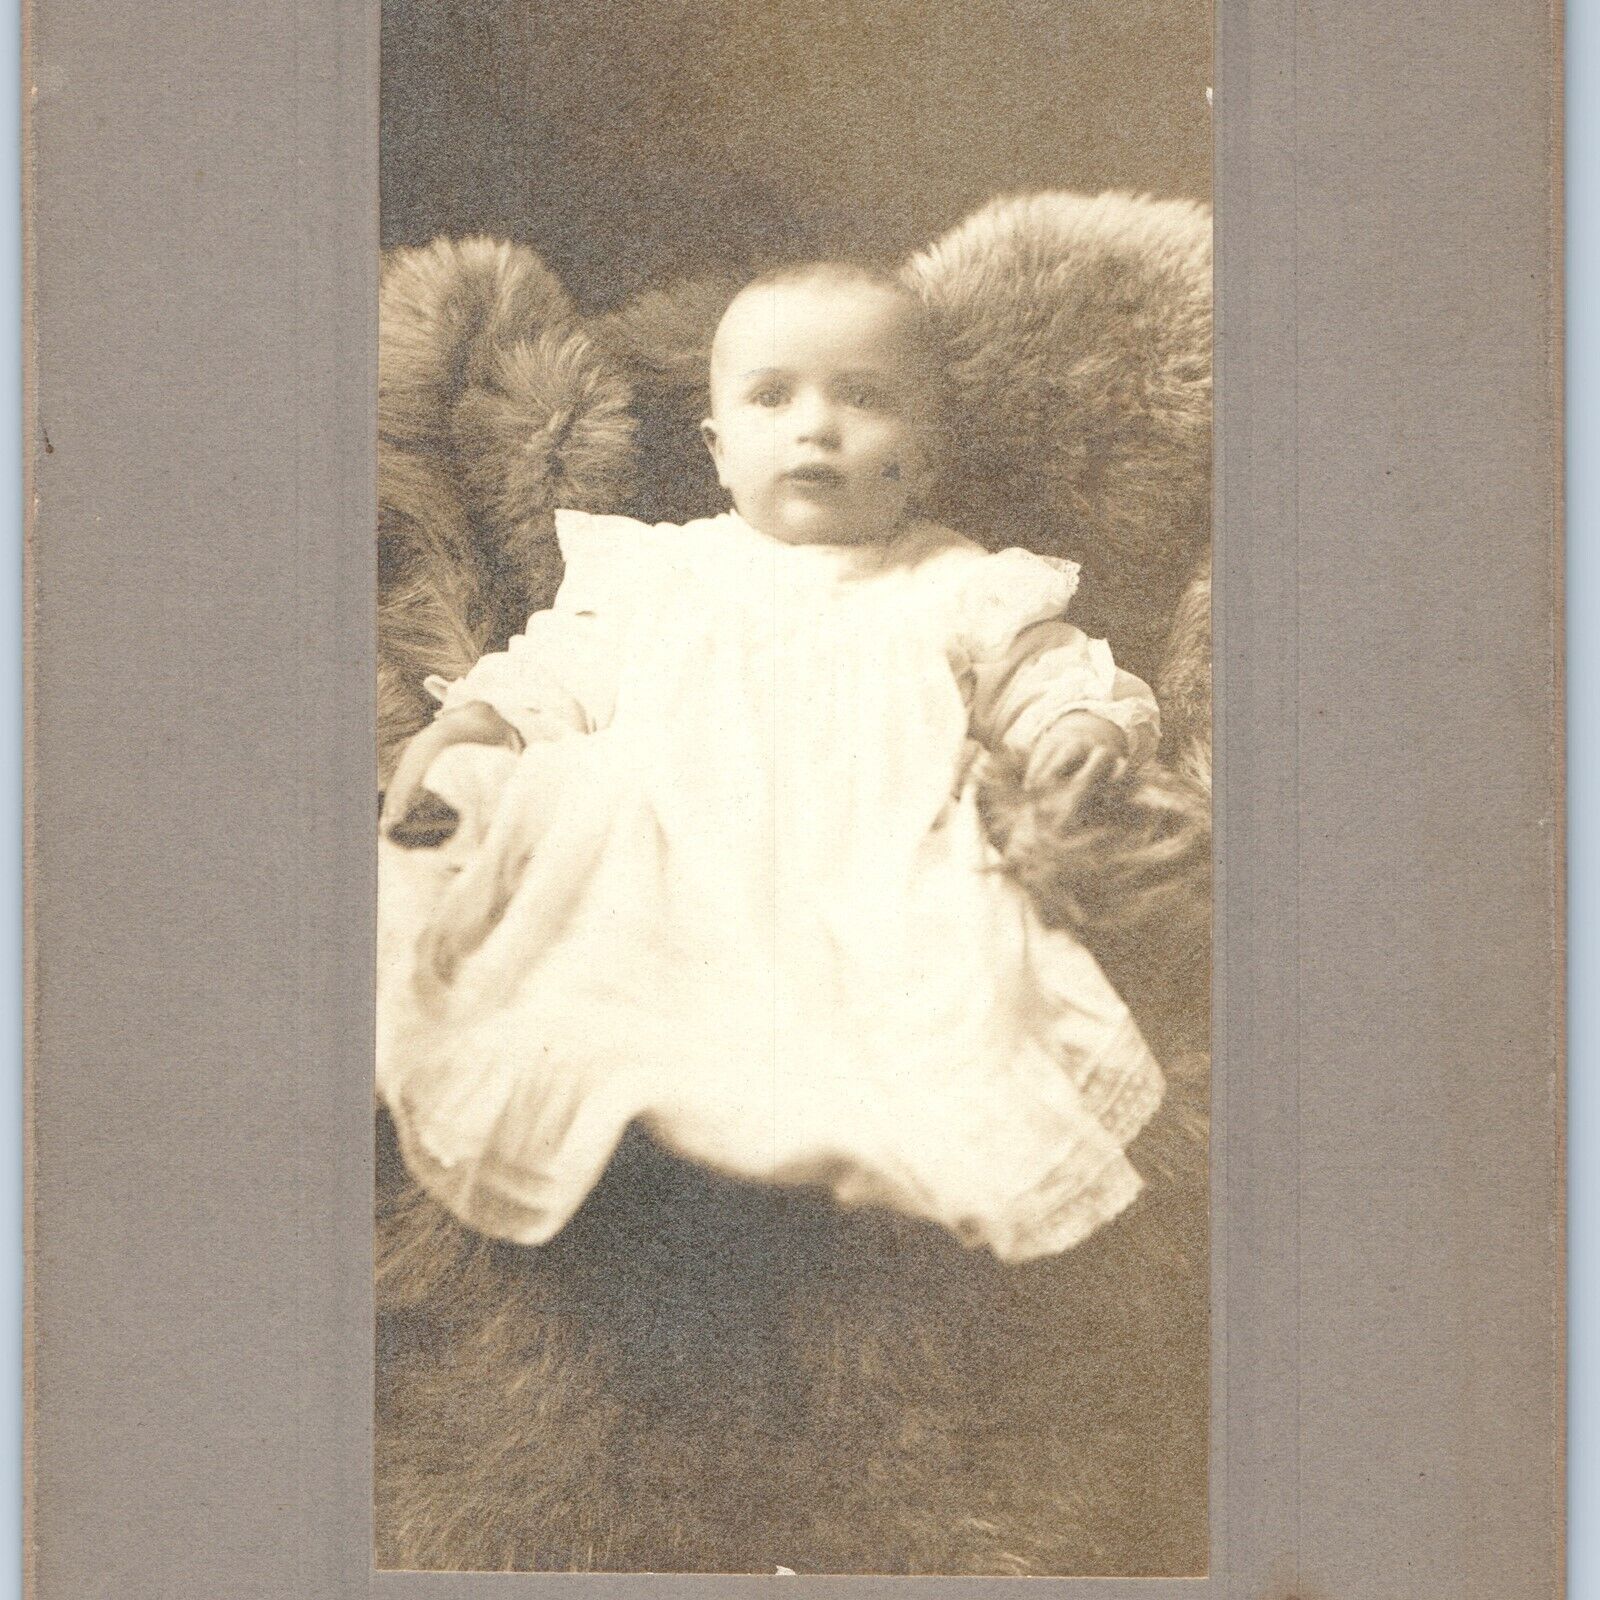 c1900s Clyde, OH Baby Sitting in Fur Tall Cabinet Card Photo Antique Ohio 1G